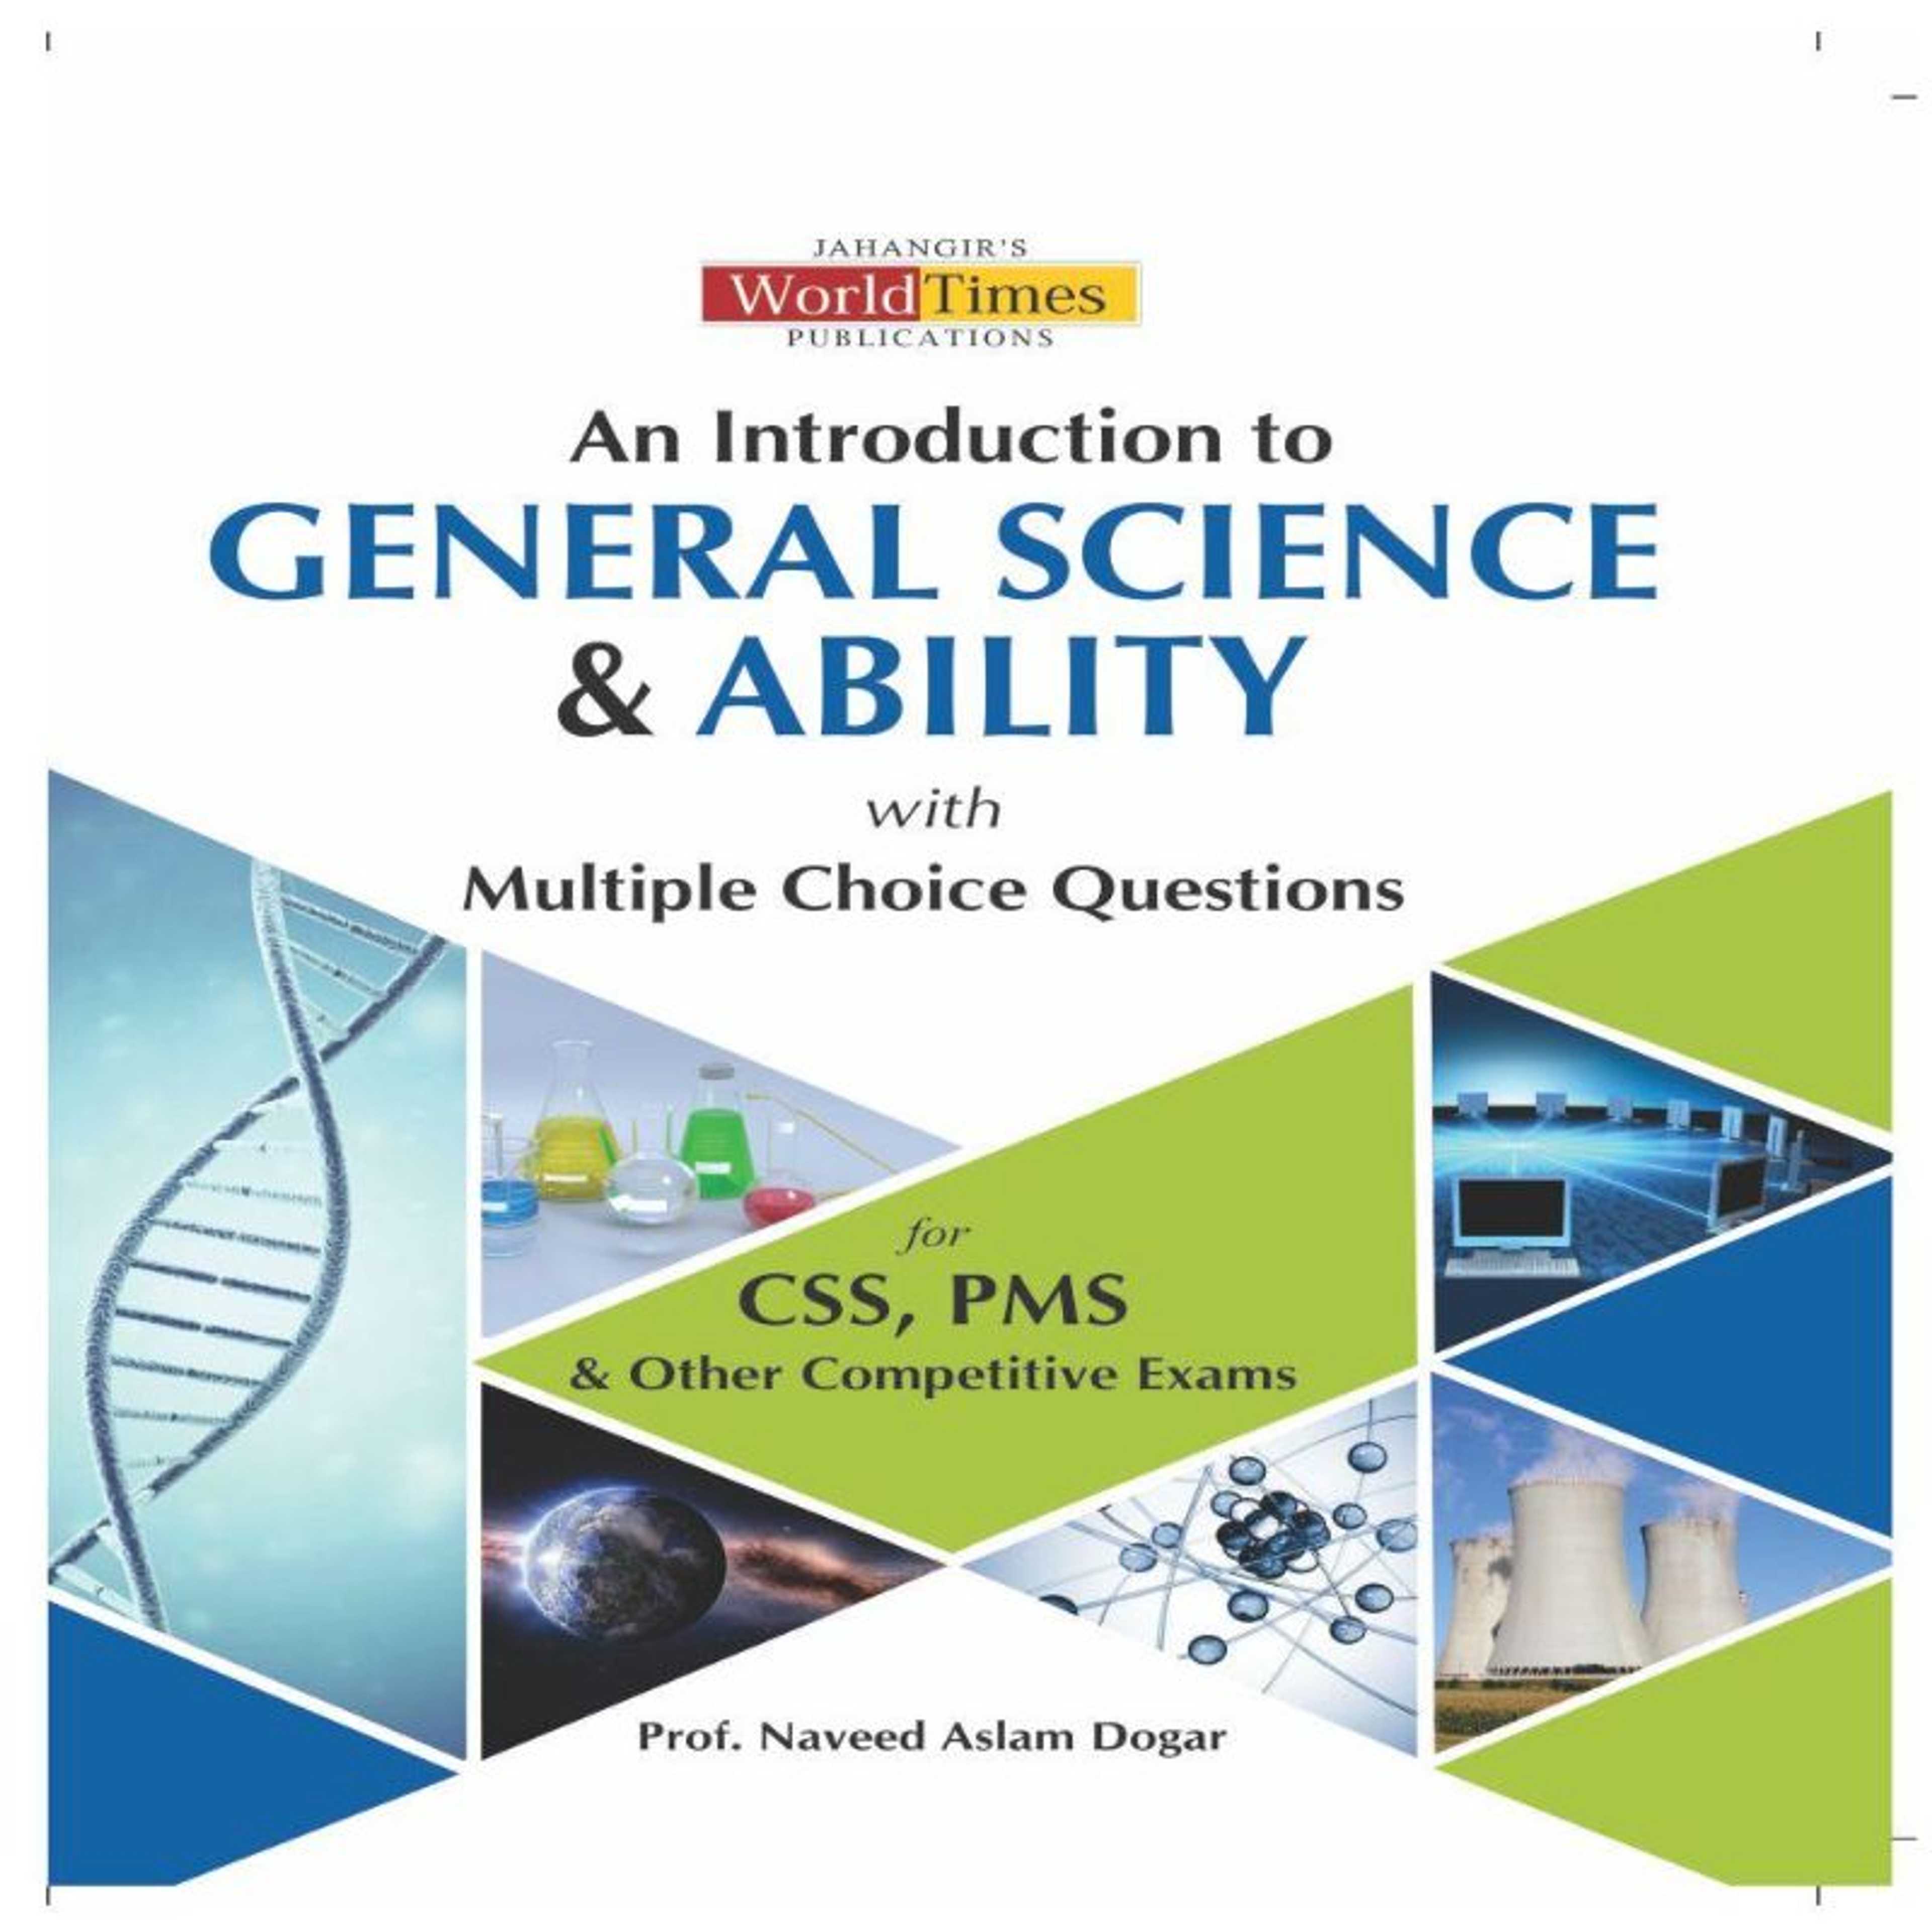 An Introduction to General Science & Ability